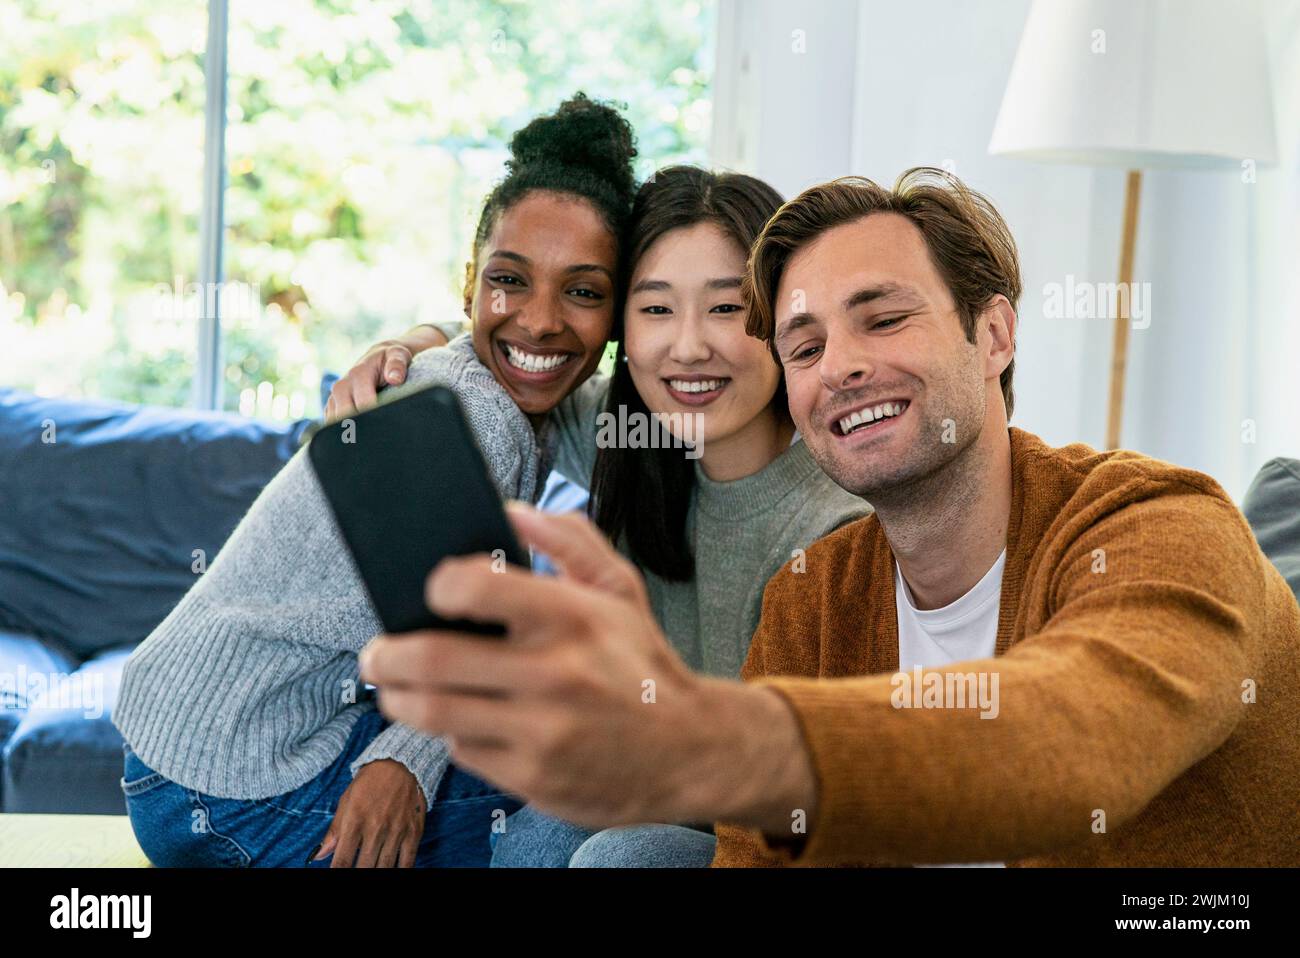 Small group of friends taking a selfie while sitting on sofa Stock Photo